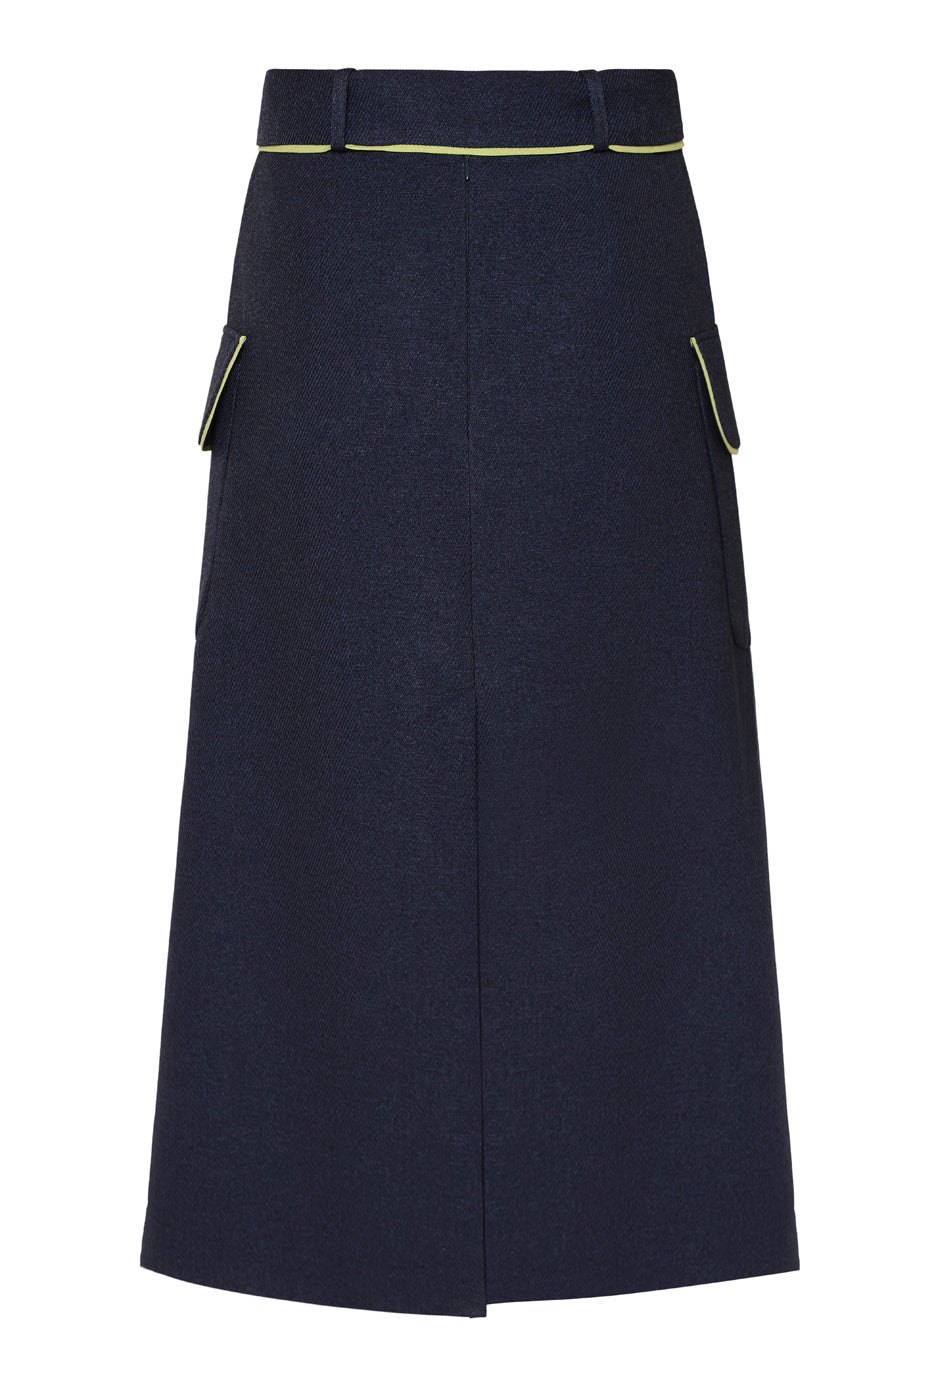 Load image into Gallery viewer, Olive Detailed Navy Skirt
